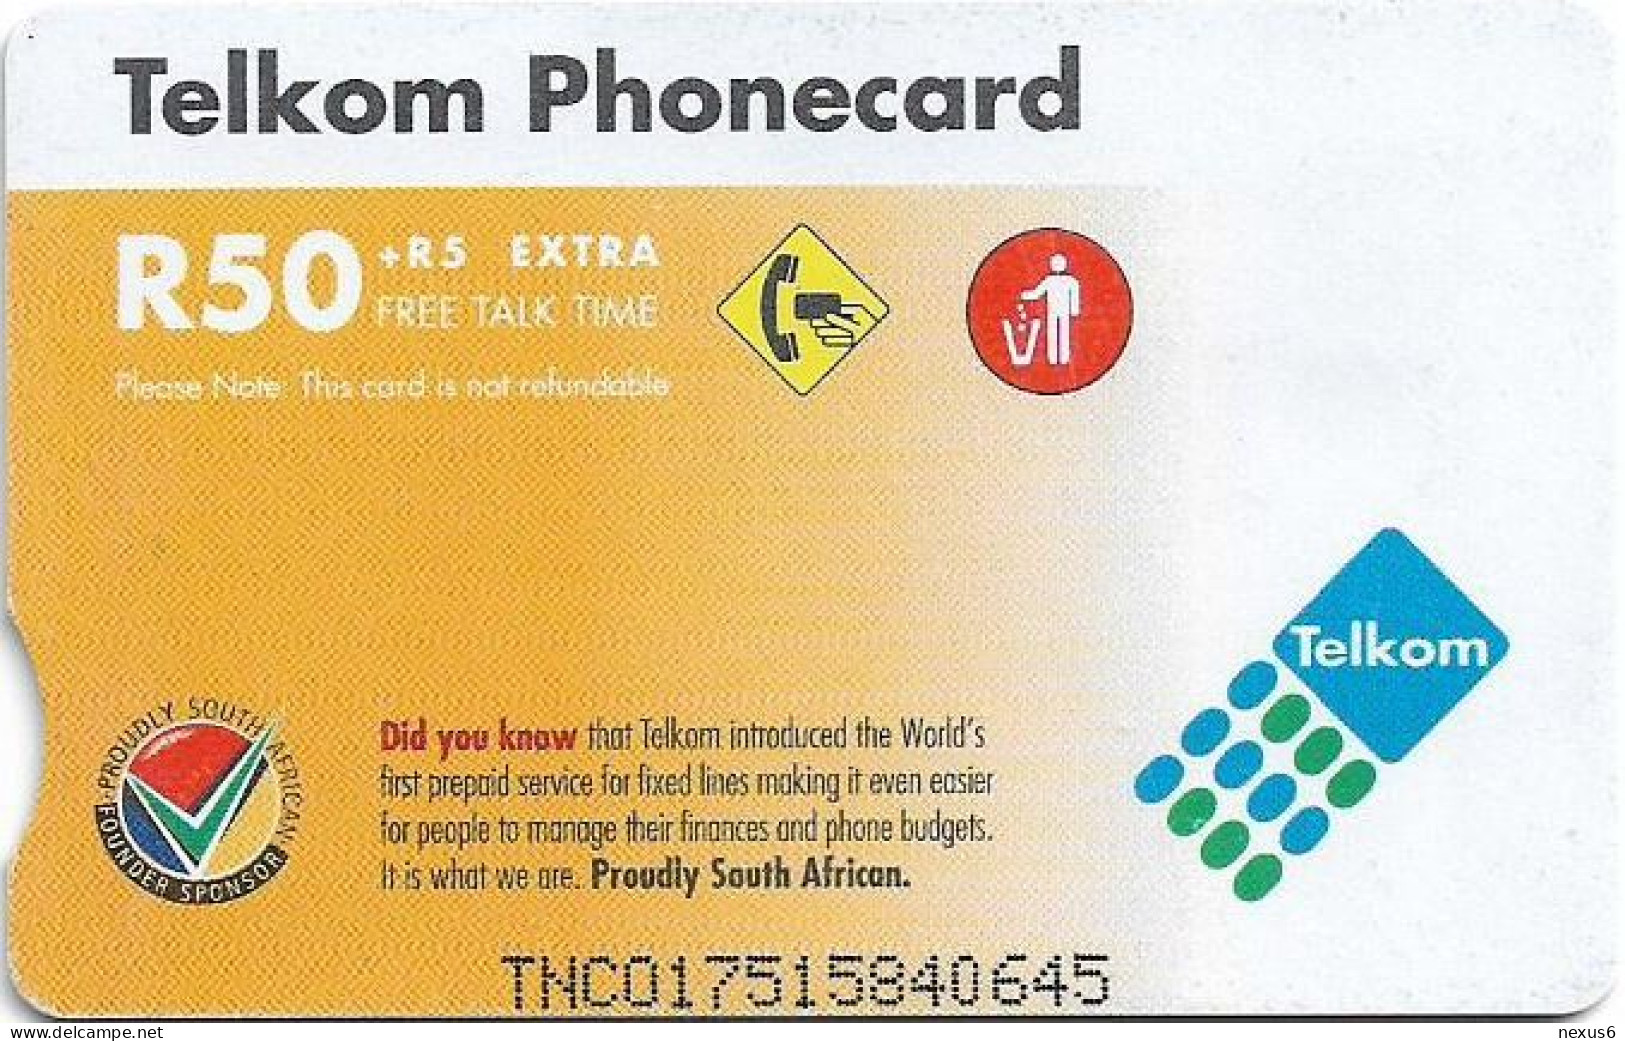 S. Africa - Telkom - Ulwazi, Telecommunications Tower, Cn. 'TNCO', No Expiry Date, Chip Siemens S35, 2002, 50R, Used - Afrique Du Sud